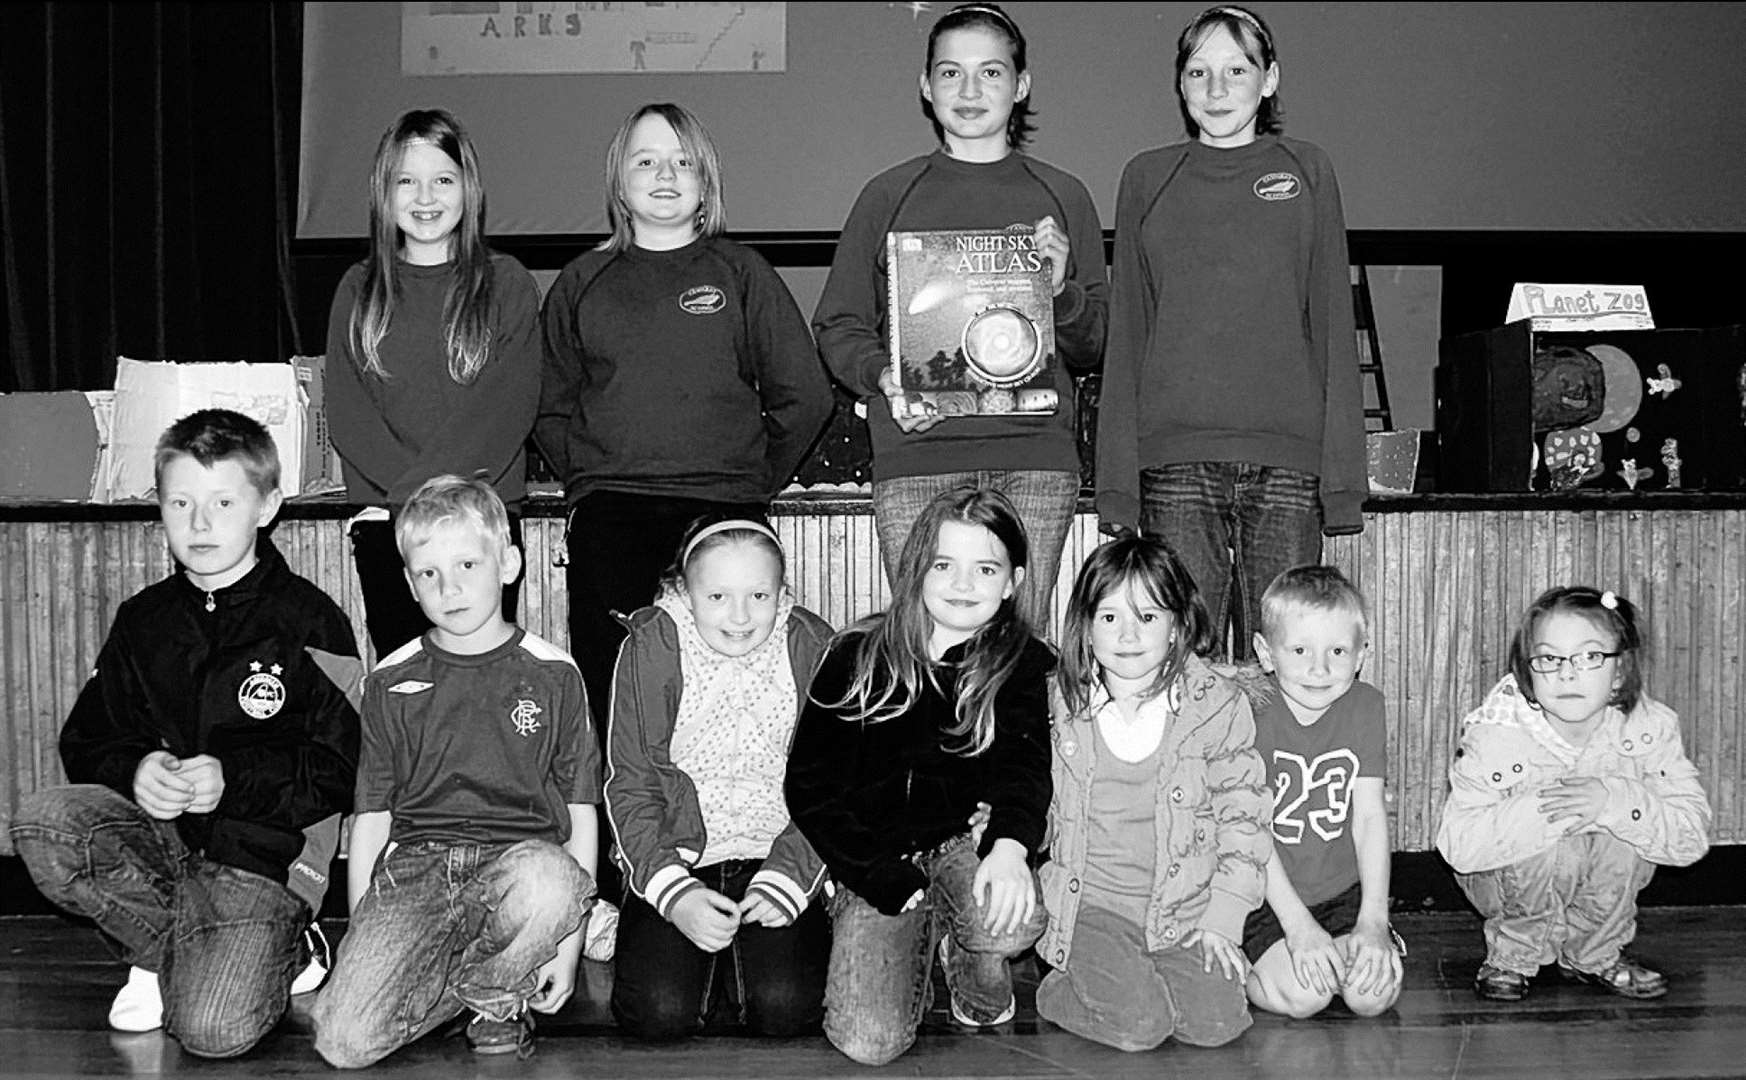 Canisbay Primary School pupils were winners in the junior category of Caithness Astronomy Group’s astro art competition during a fun day in Thurso in June 2009.